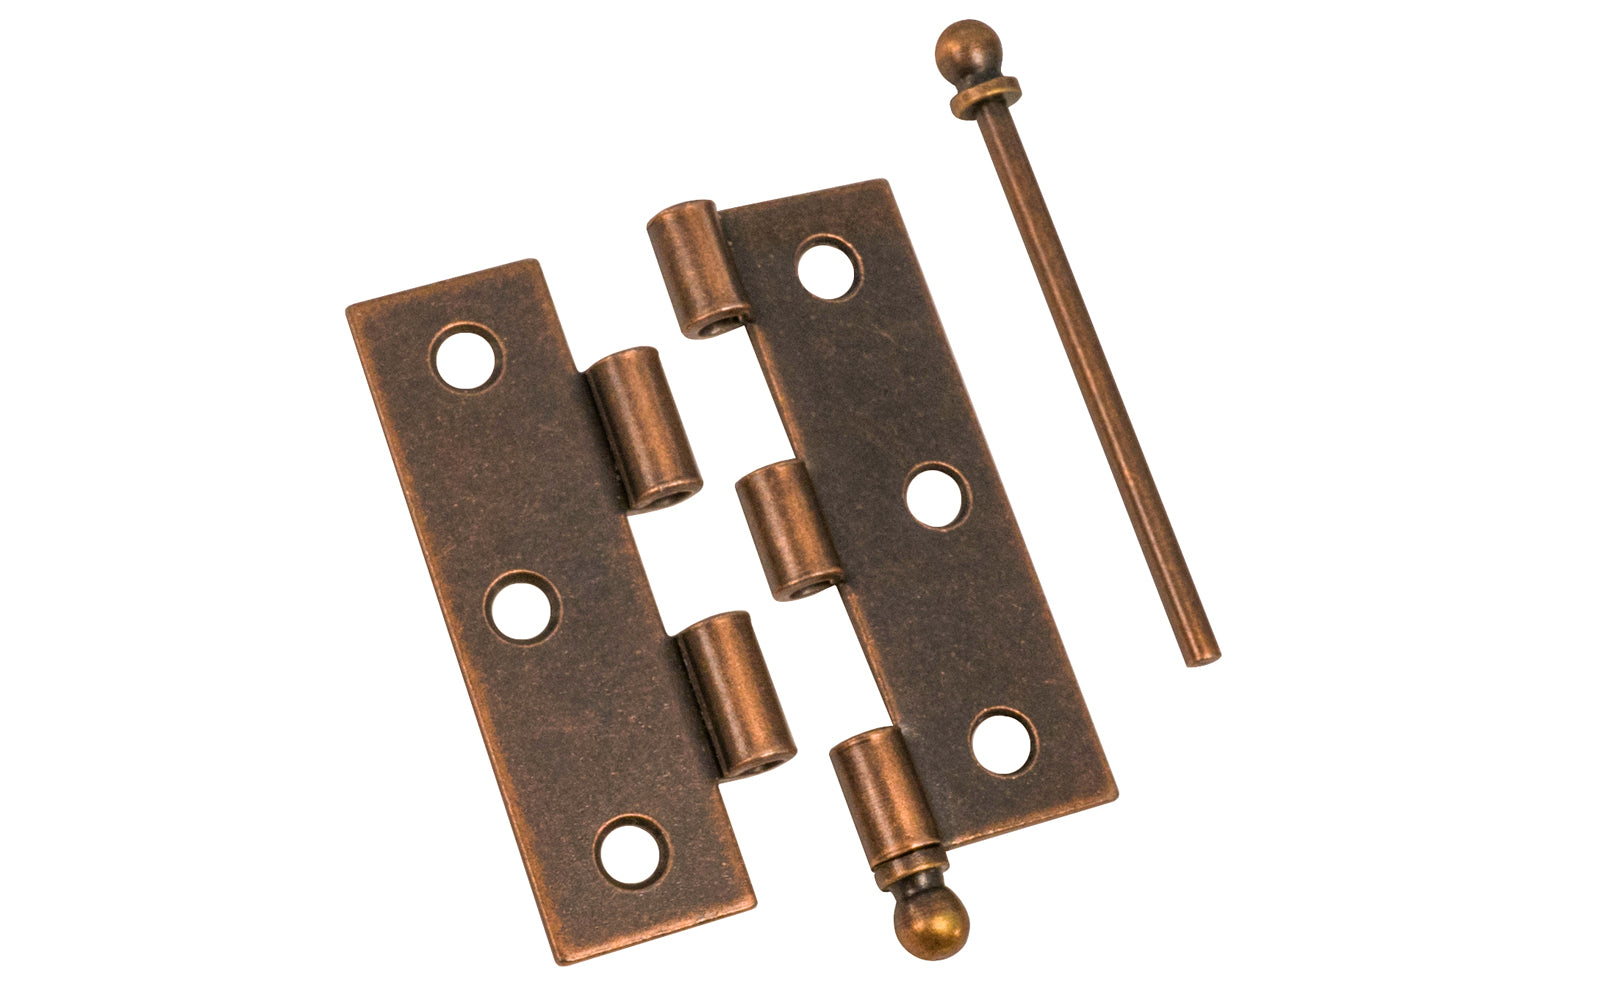 Traditional & classic ball-tip steel cabinet hinges with loose pins. Removable hinge pins which makes for easy installation when working with cabinets. 2-7/16